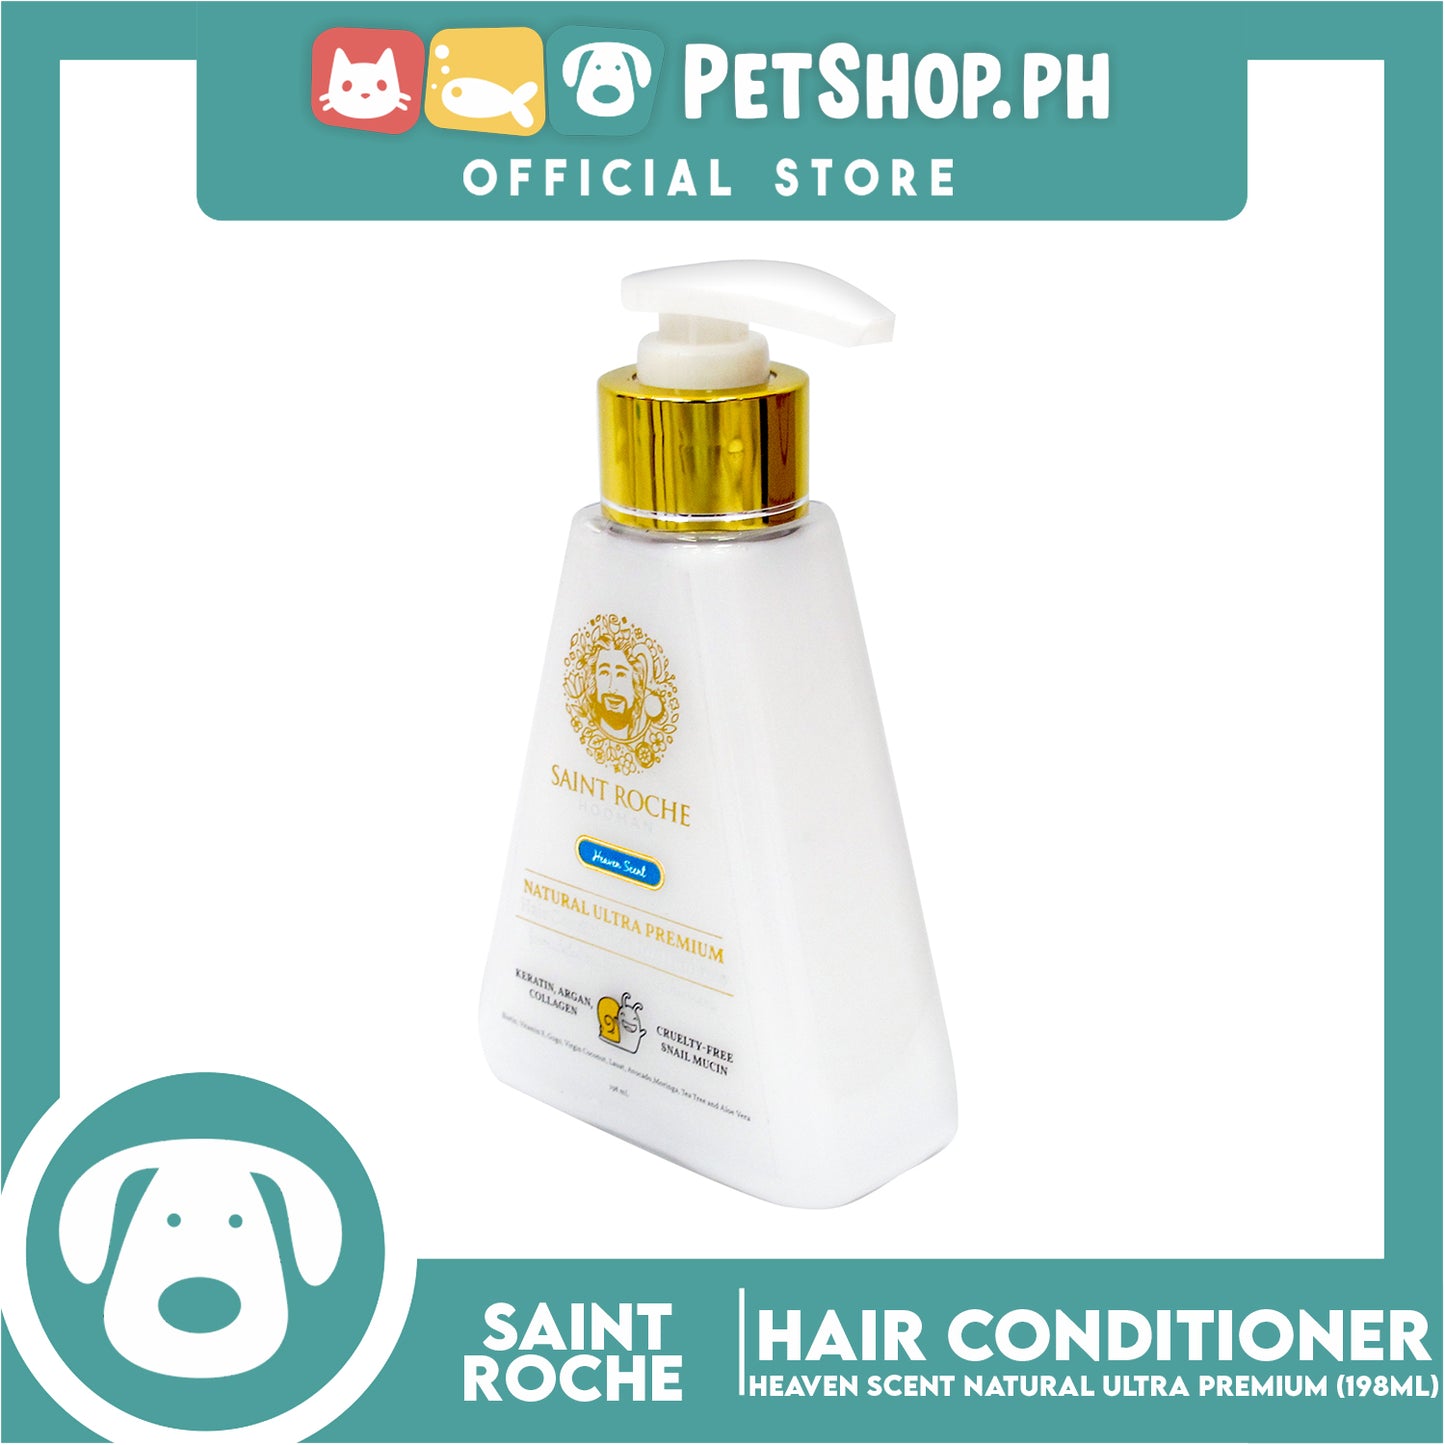 Saint Roche Hooman Natural Ultra Premium Conditioner (Heaven Scent) 198ml For The Skin and Coat of Your Dogs